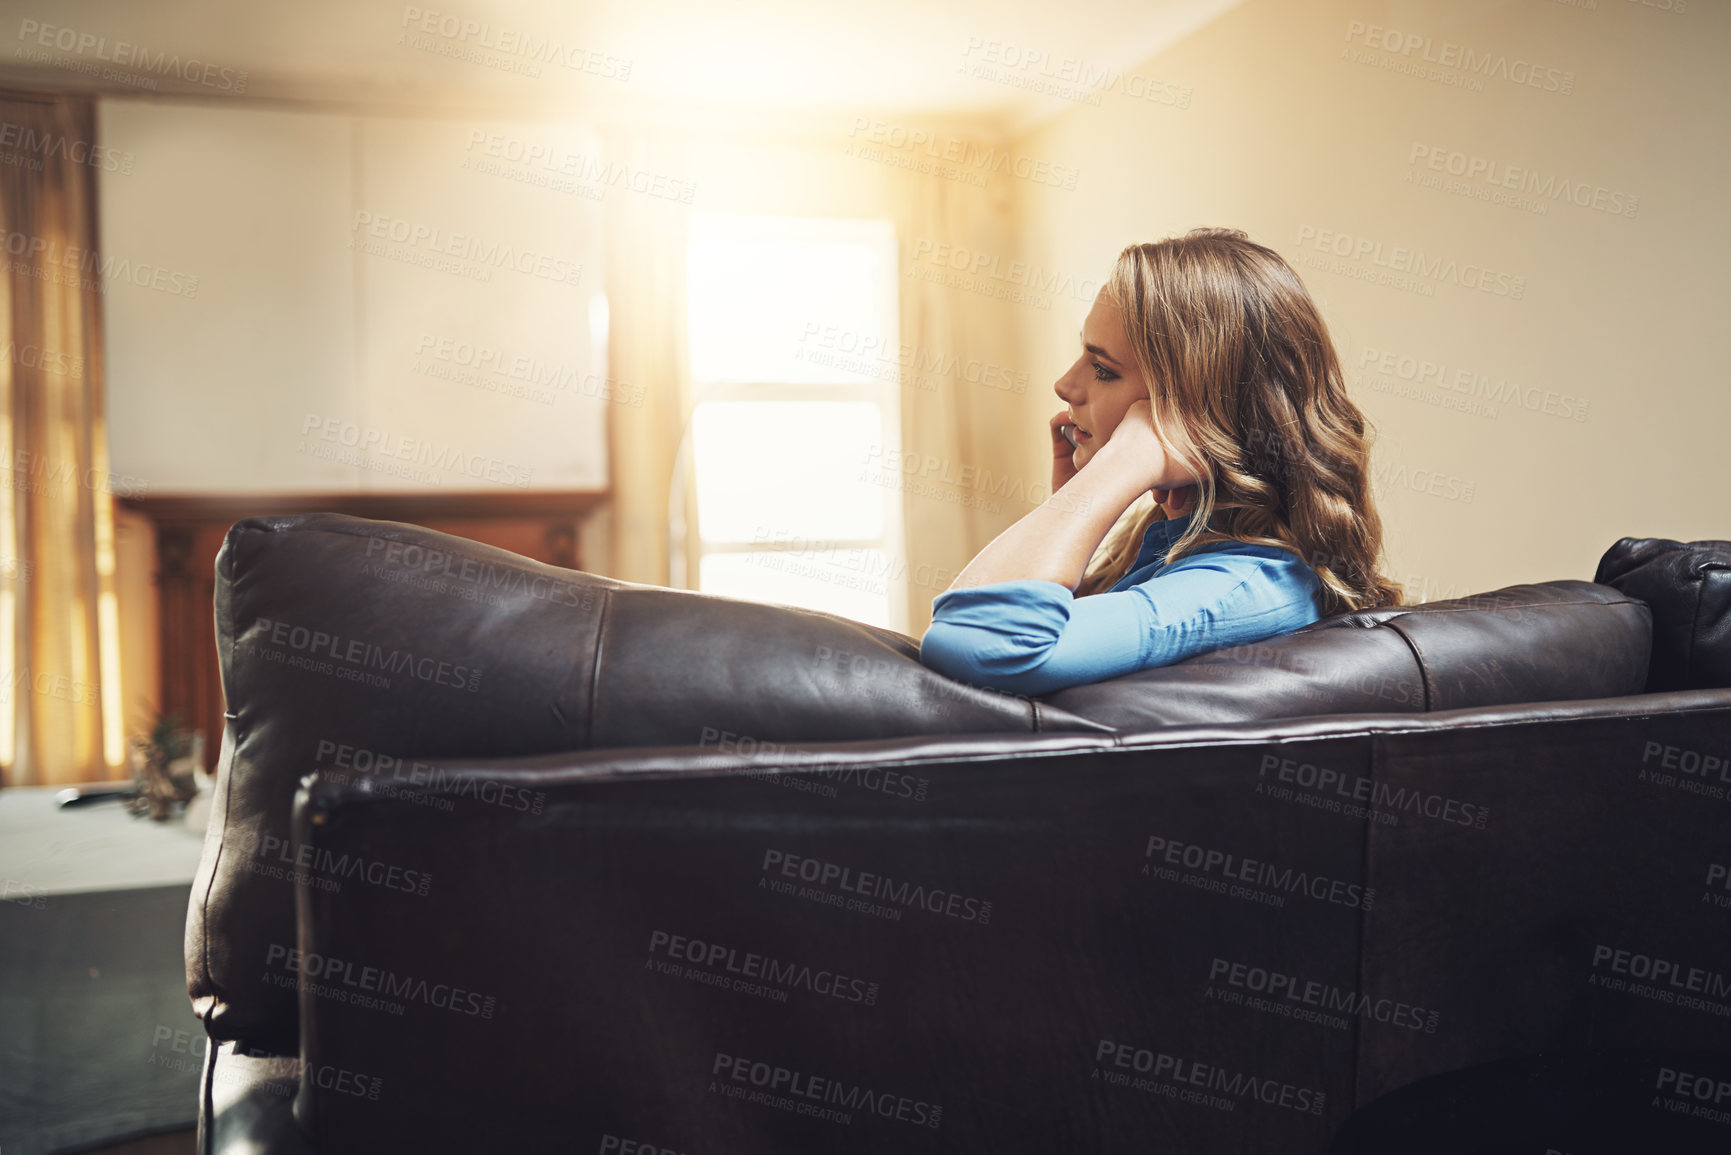 Buy stock photo Shot of a relaxed young woman using a smartphone on the sofa at home